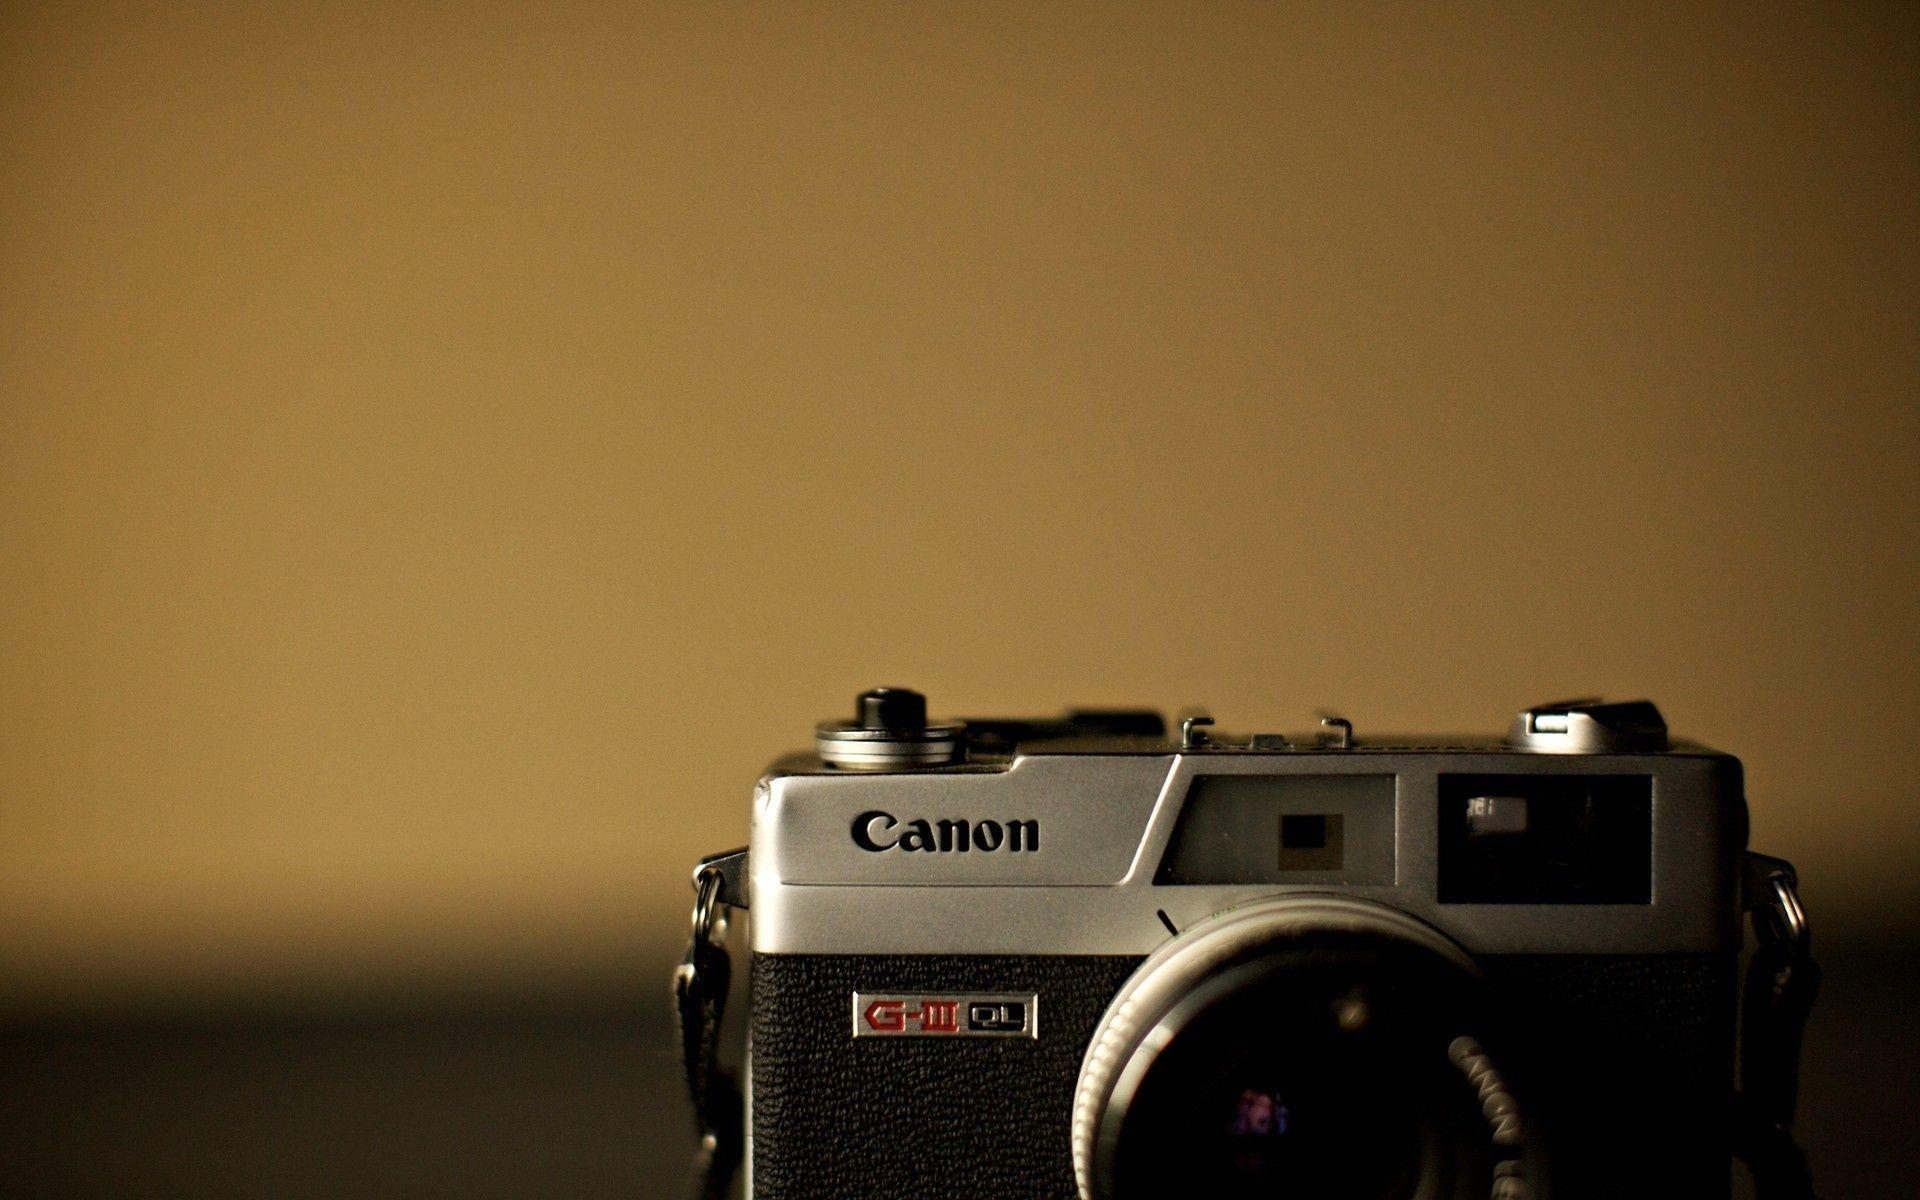 HD Canon Wallpaper and Photo. HD Photography Wallpaper